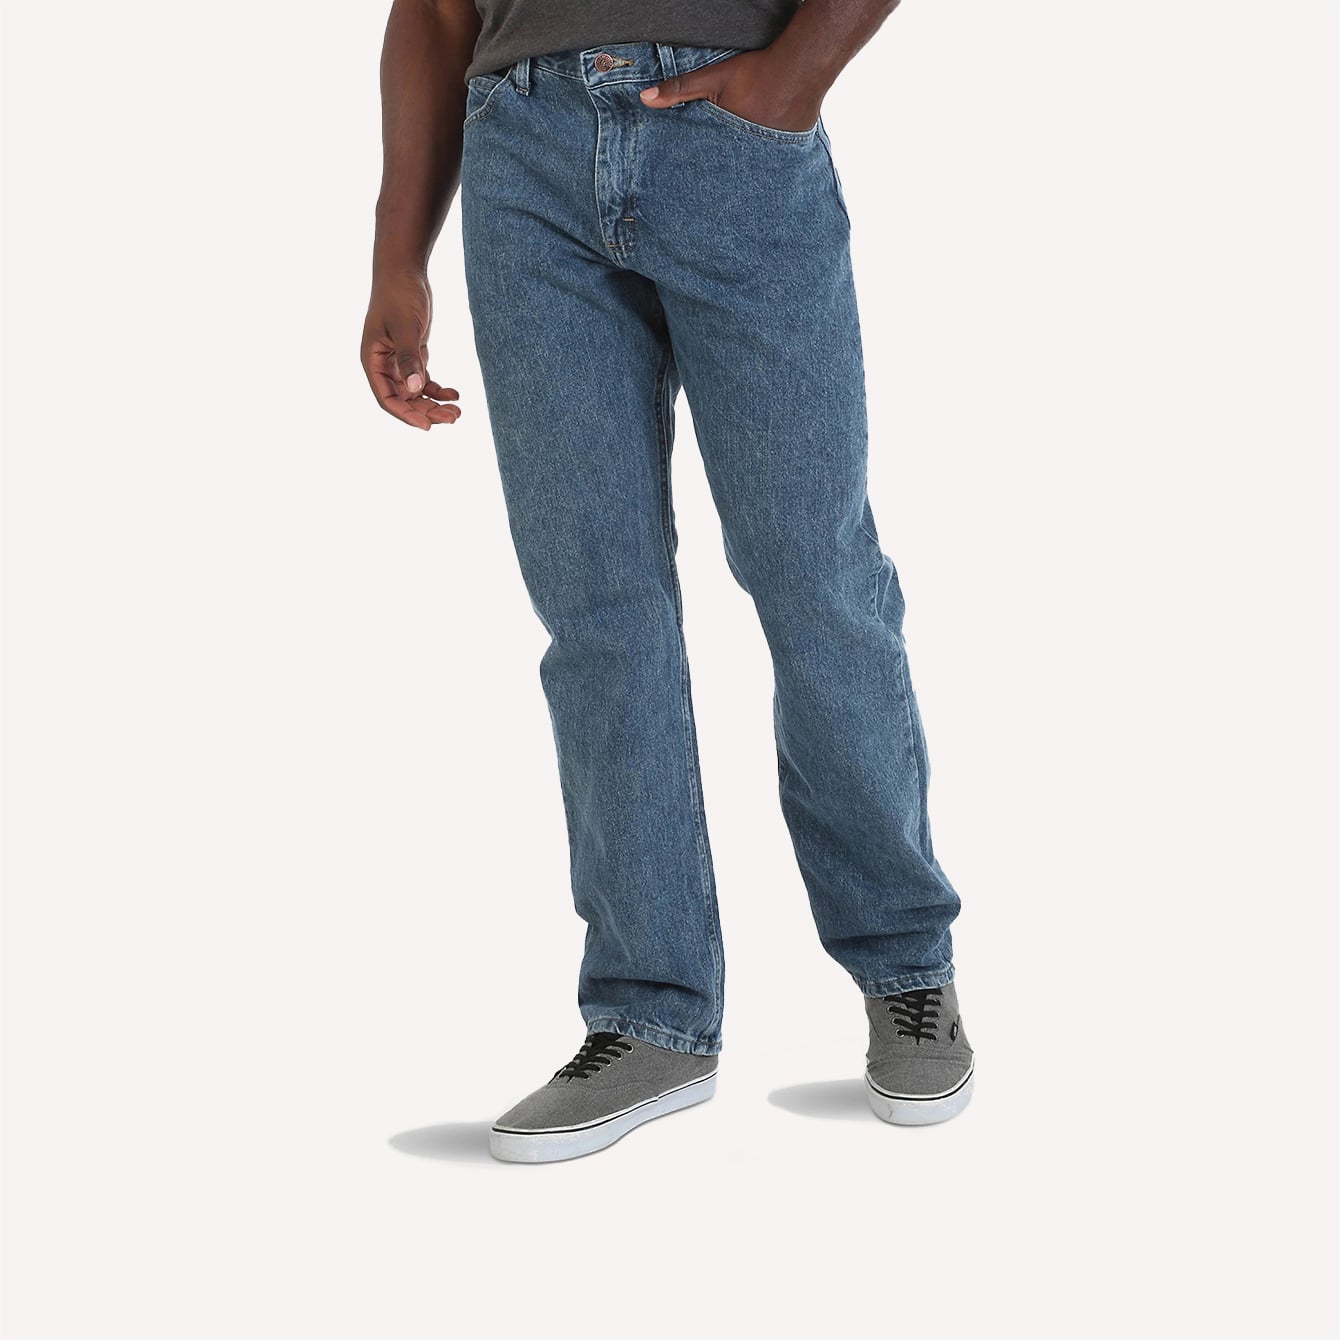 The best places to buy men's jeans online: Gap, Levi's, and more - Reviewed